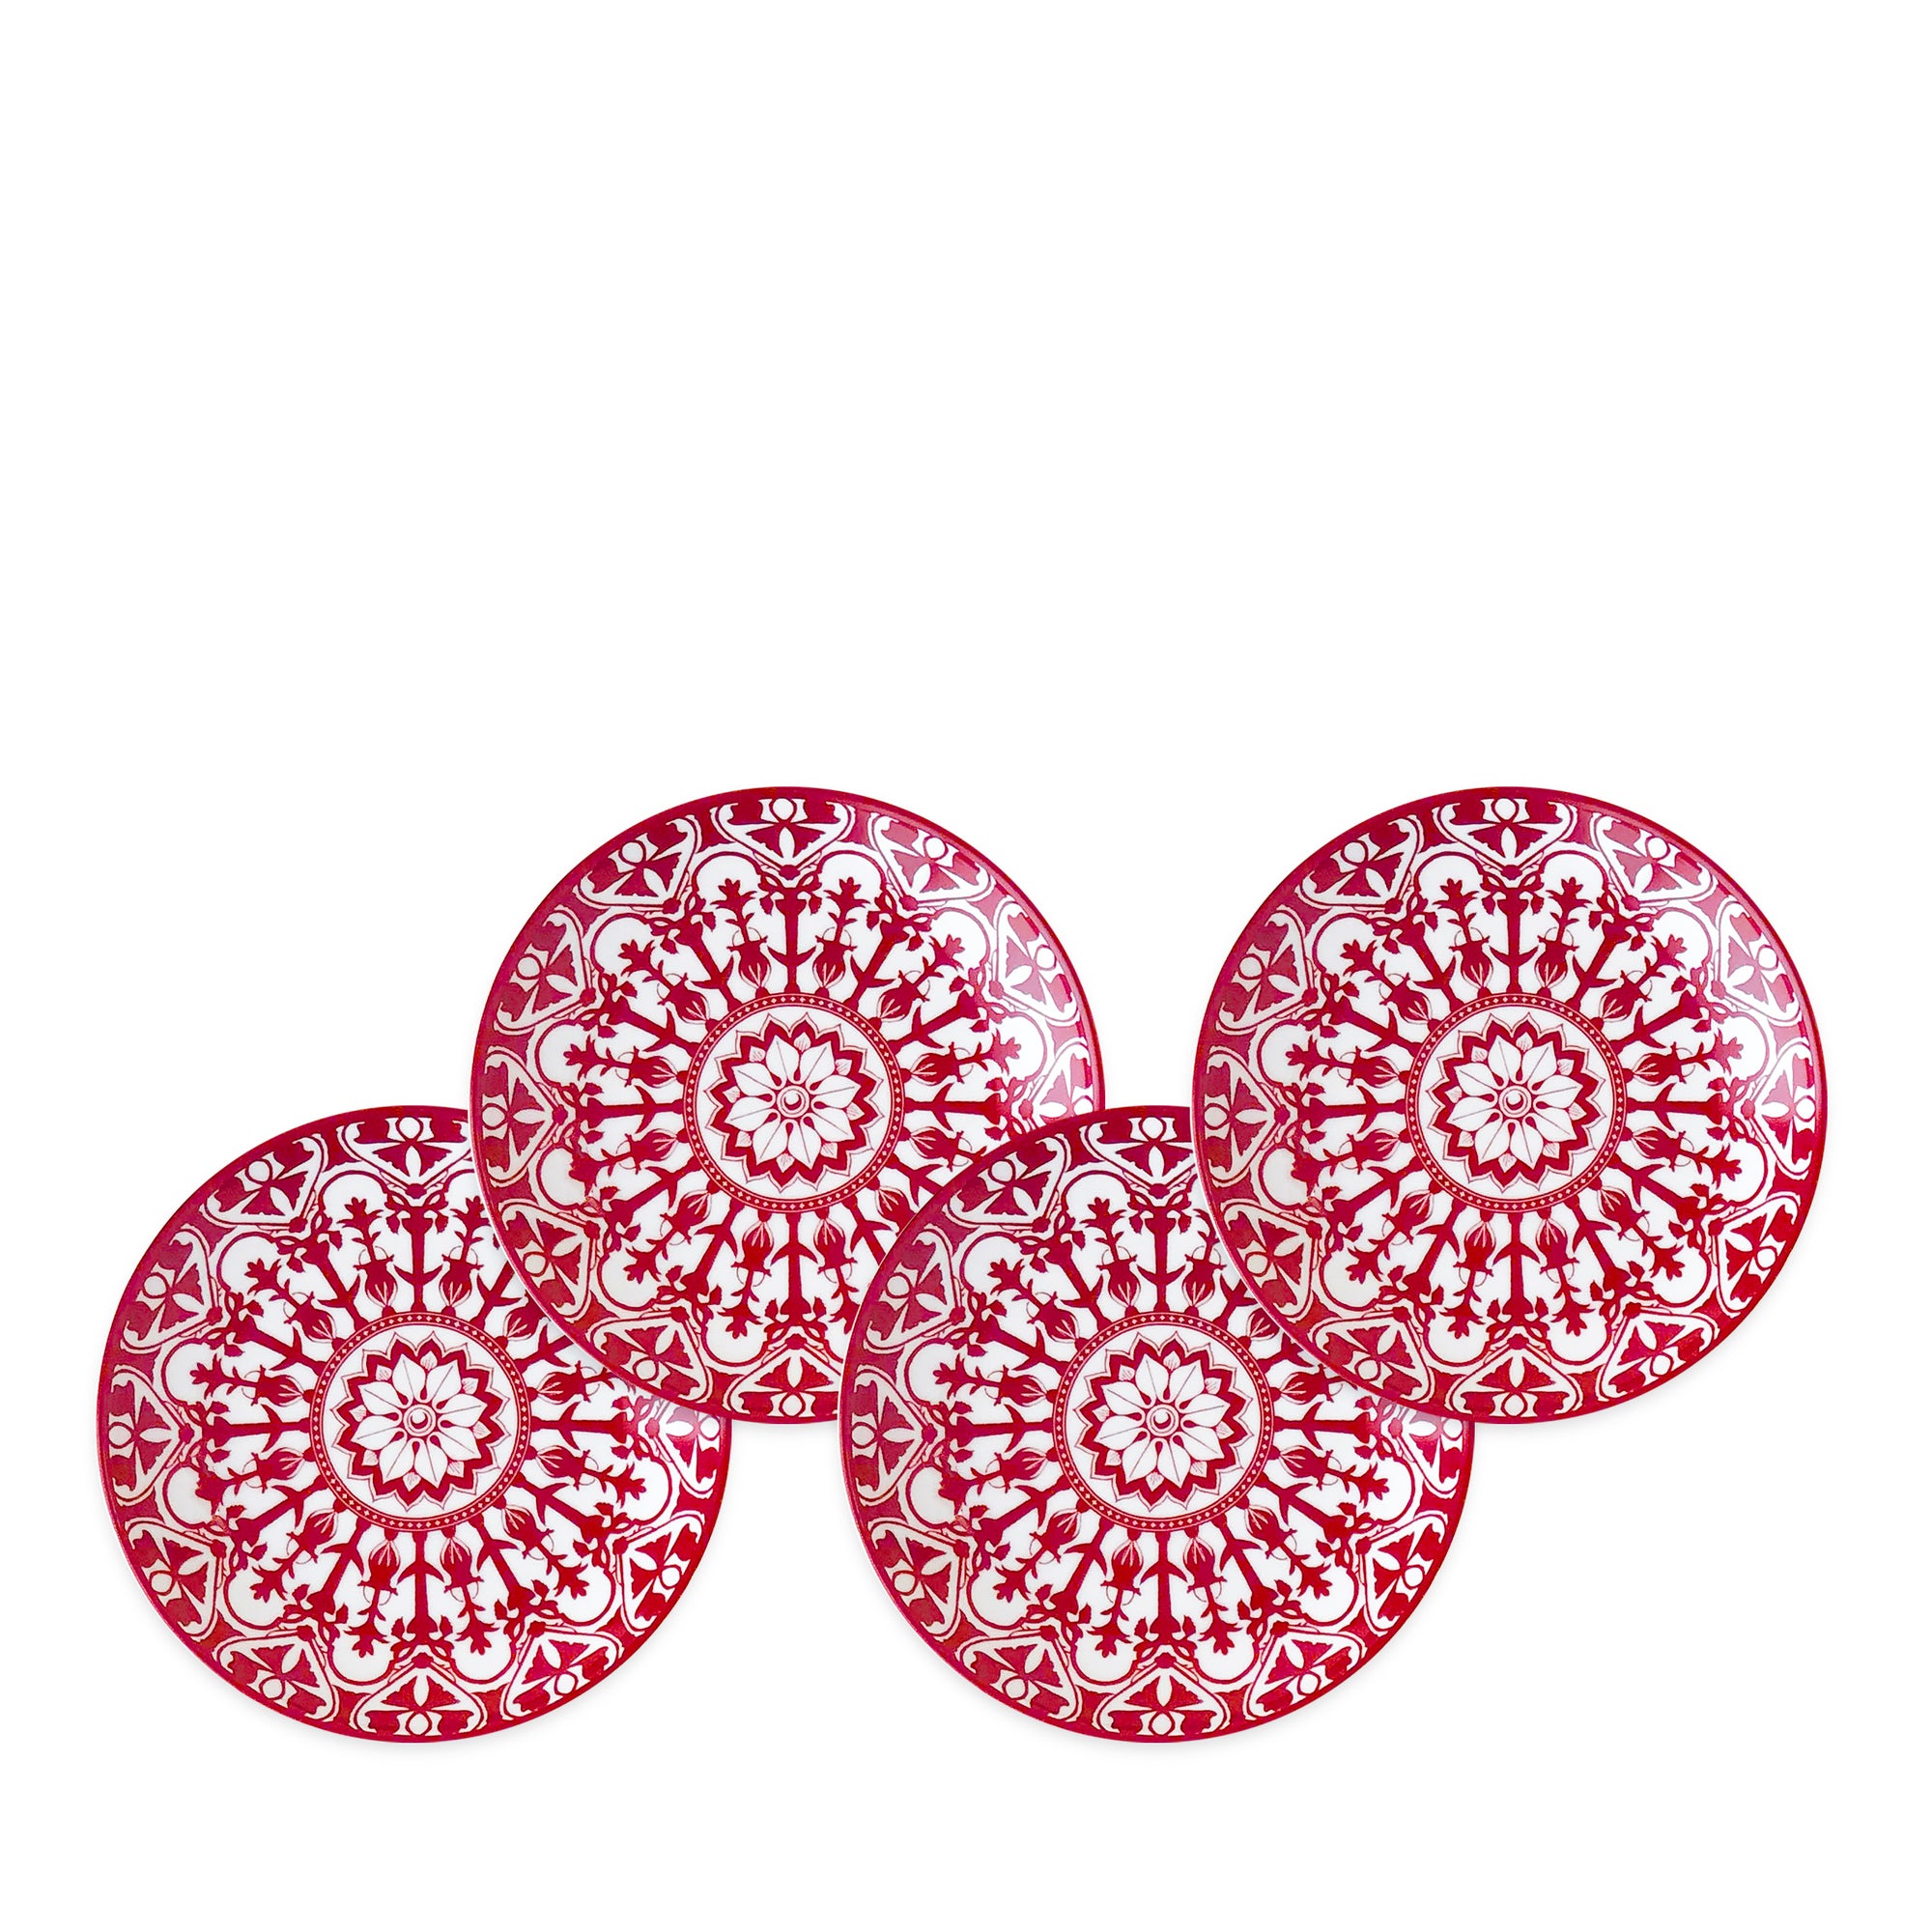 Four round plates with intricate red and white floral patterns, reminiscent of heirloom-quality **Caskata Artisanal Home's Casablanca Crimson Small Plates**, are arranged together.